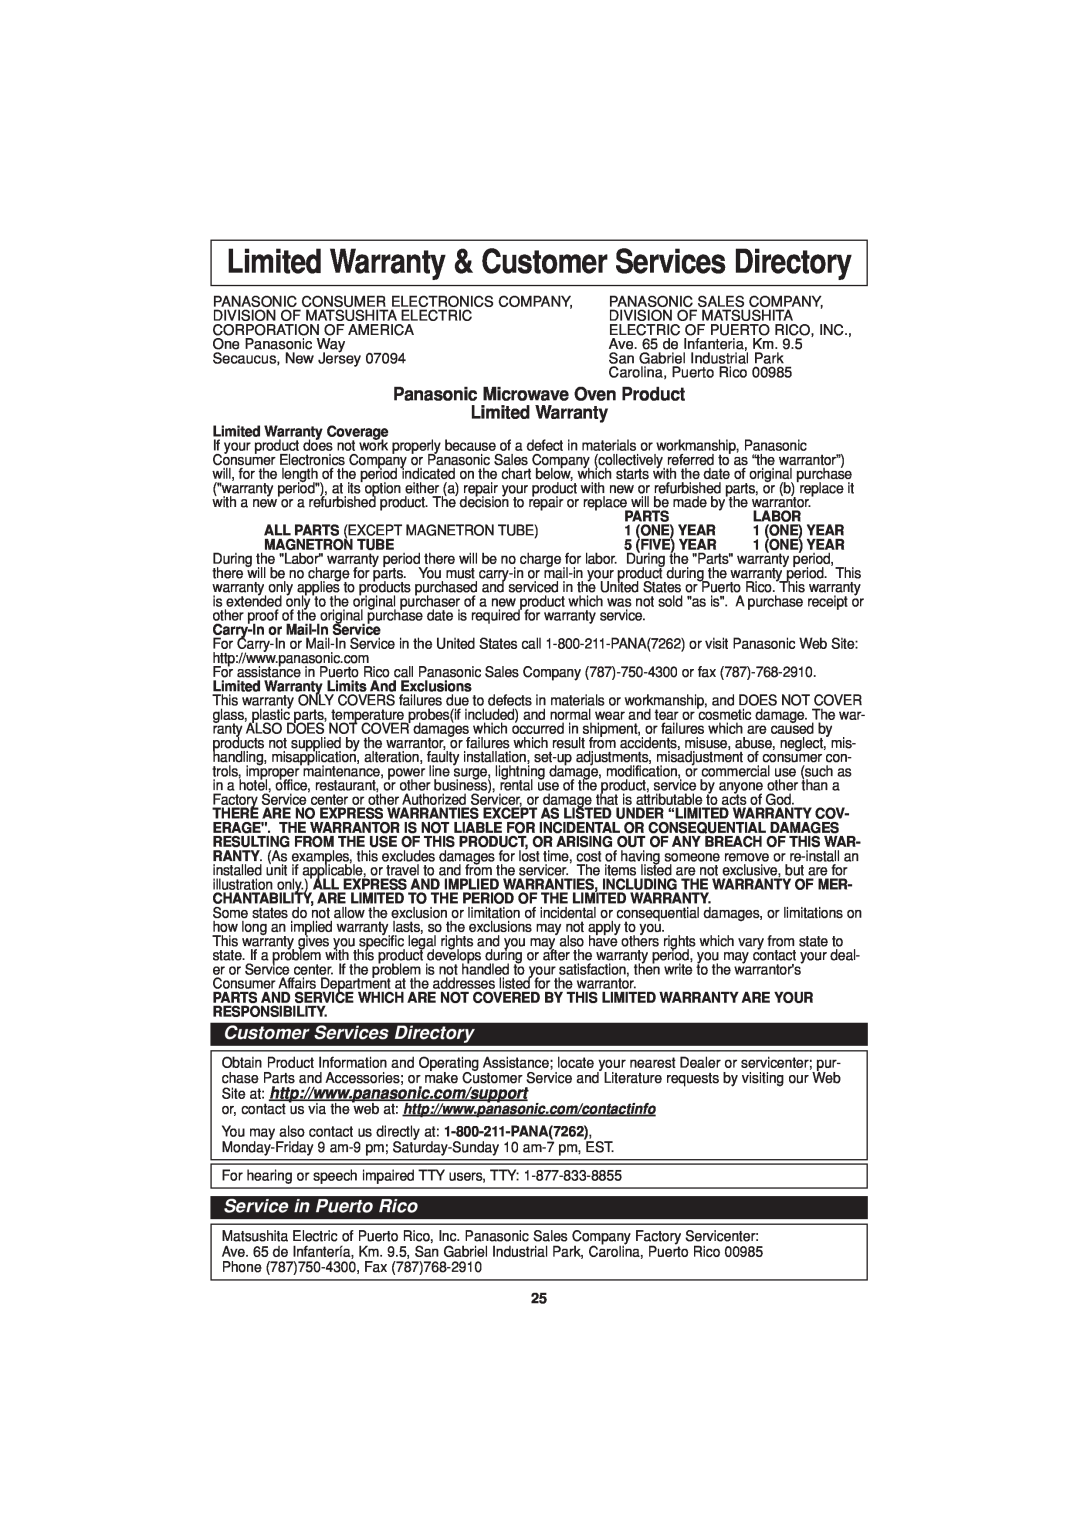 Panasonic NN-H634, NN-H644 Limited Warranty & Customer Services Directory, Service in Puerto Rico 